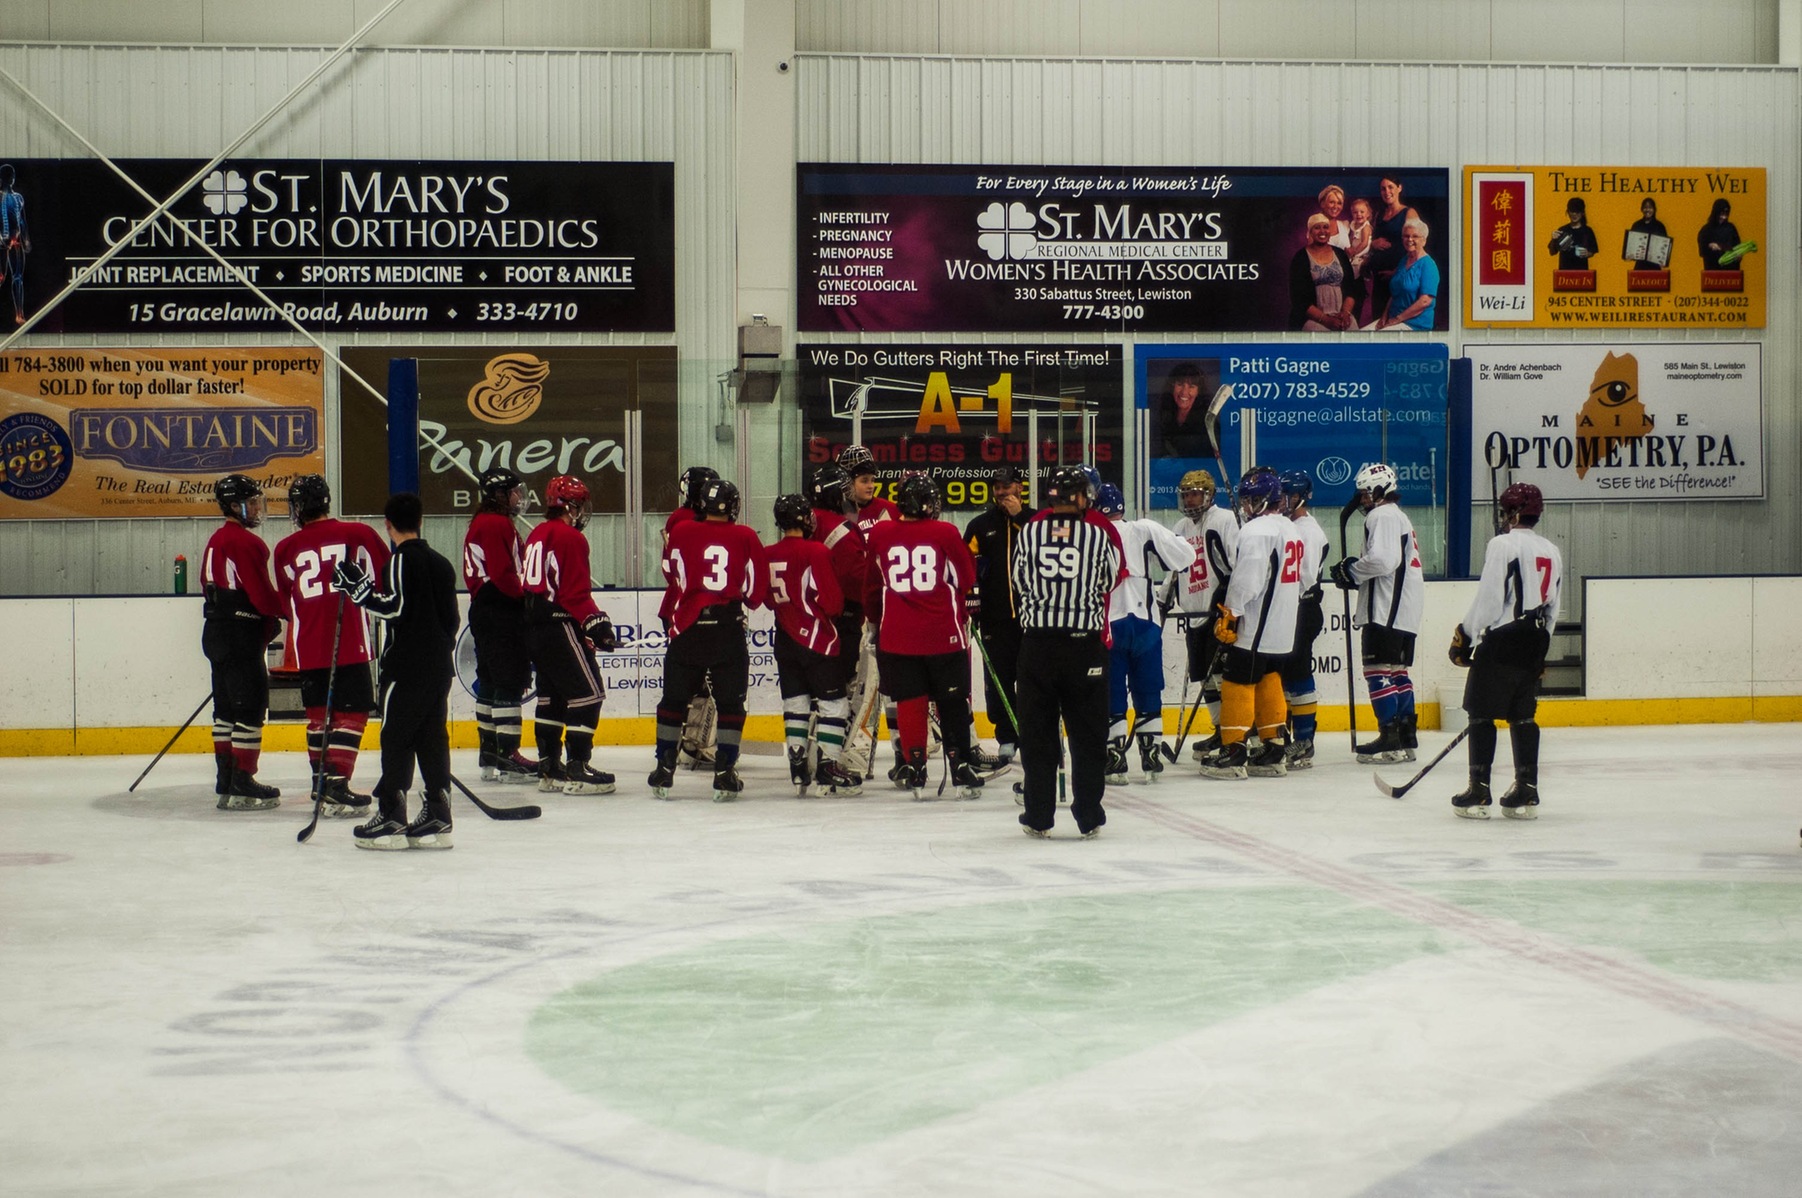 Mustangs Announce 4th Annual Prospect Skate Day